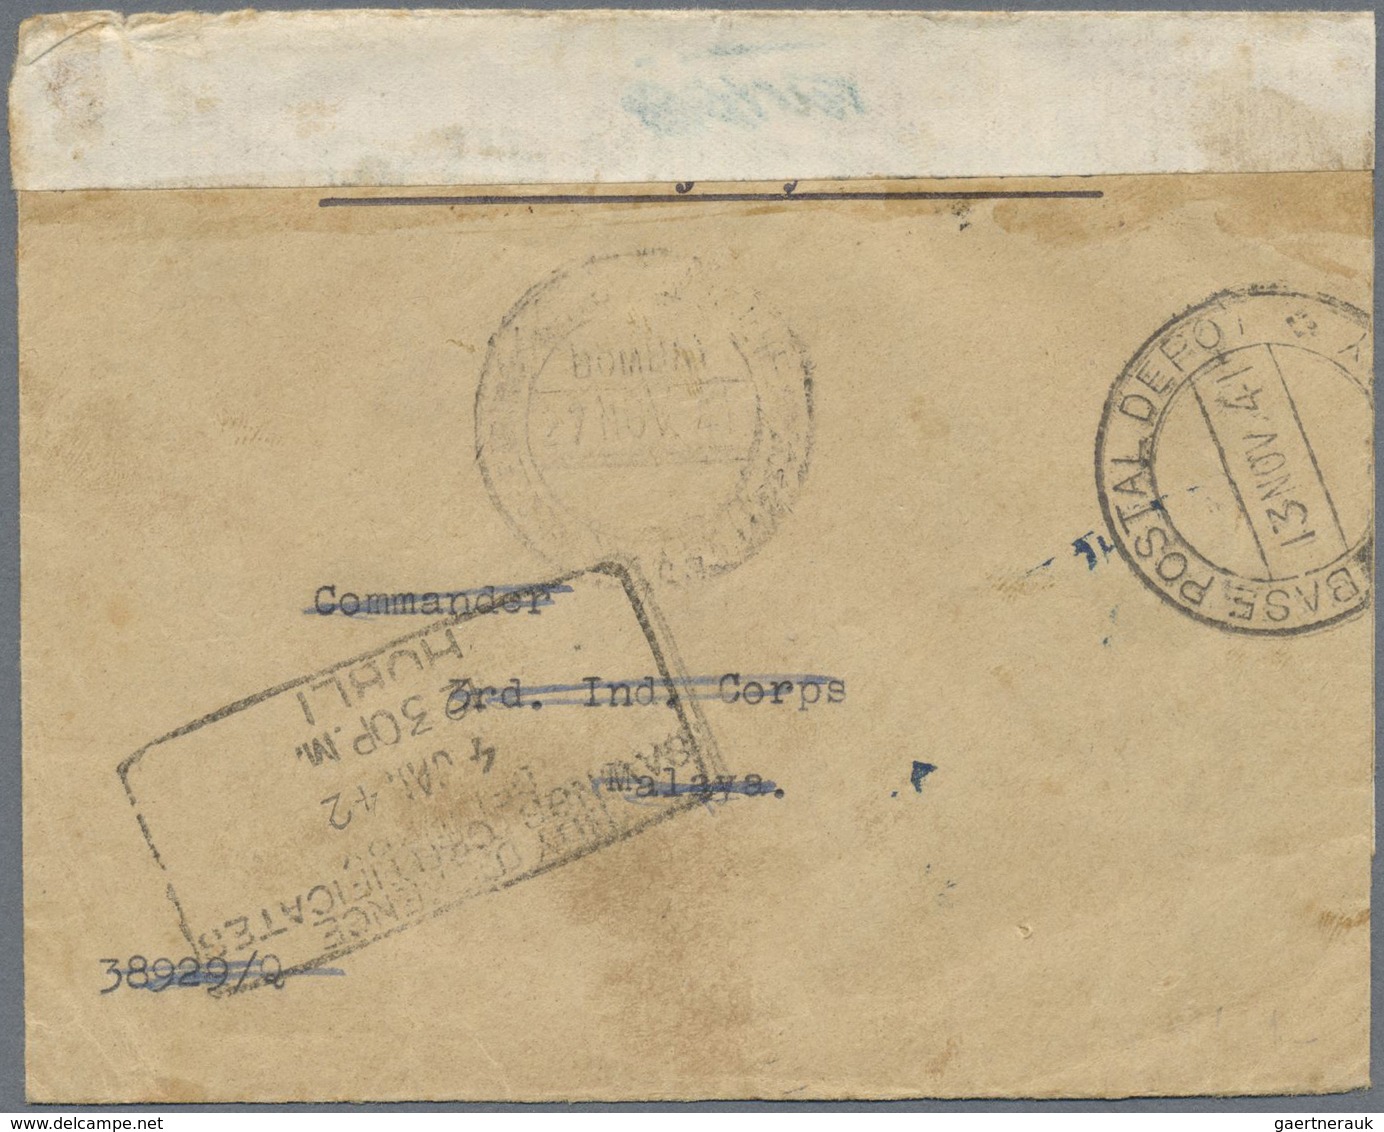 Br Malaiische Staaten - Selangor: 1941, 8 C Grey Mosque, Single Franking On Re-used Cover From The Indi - Selangor